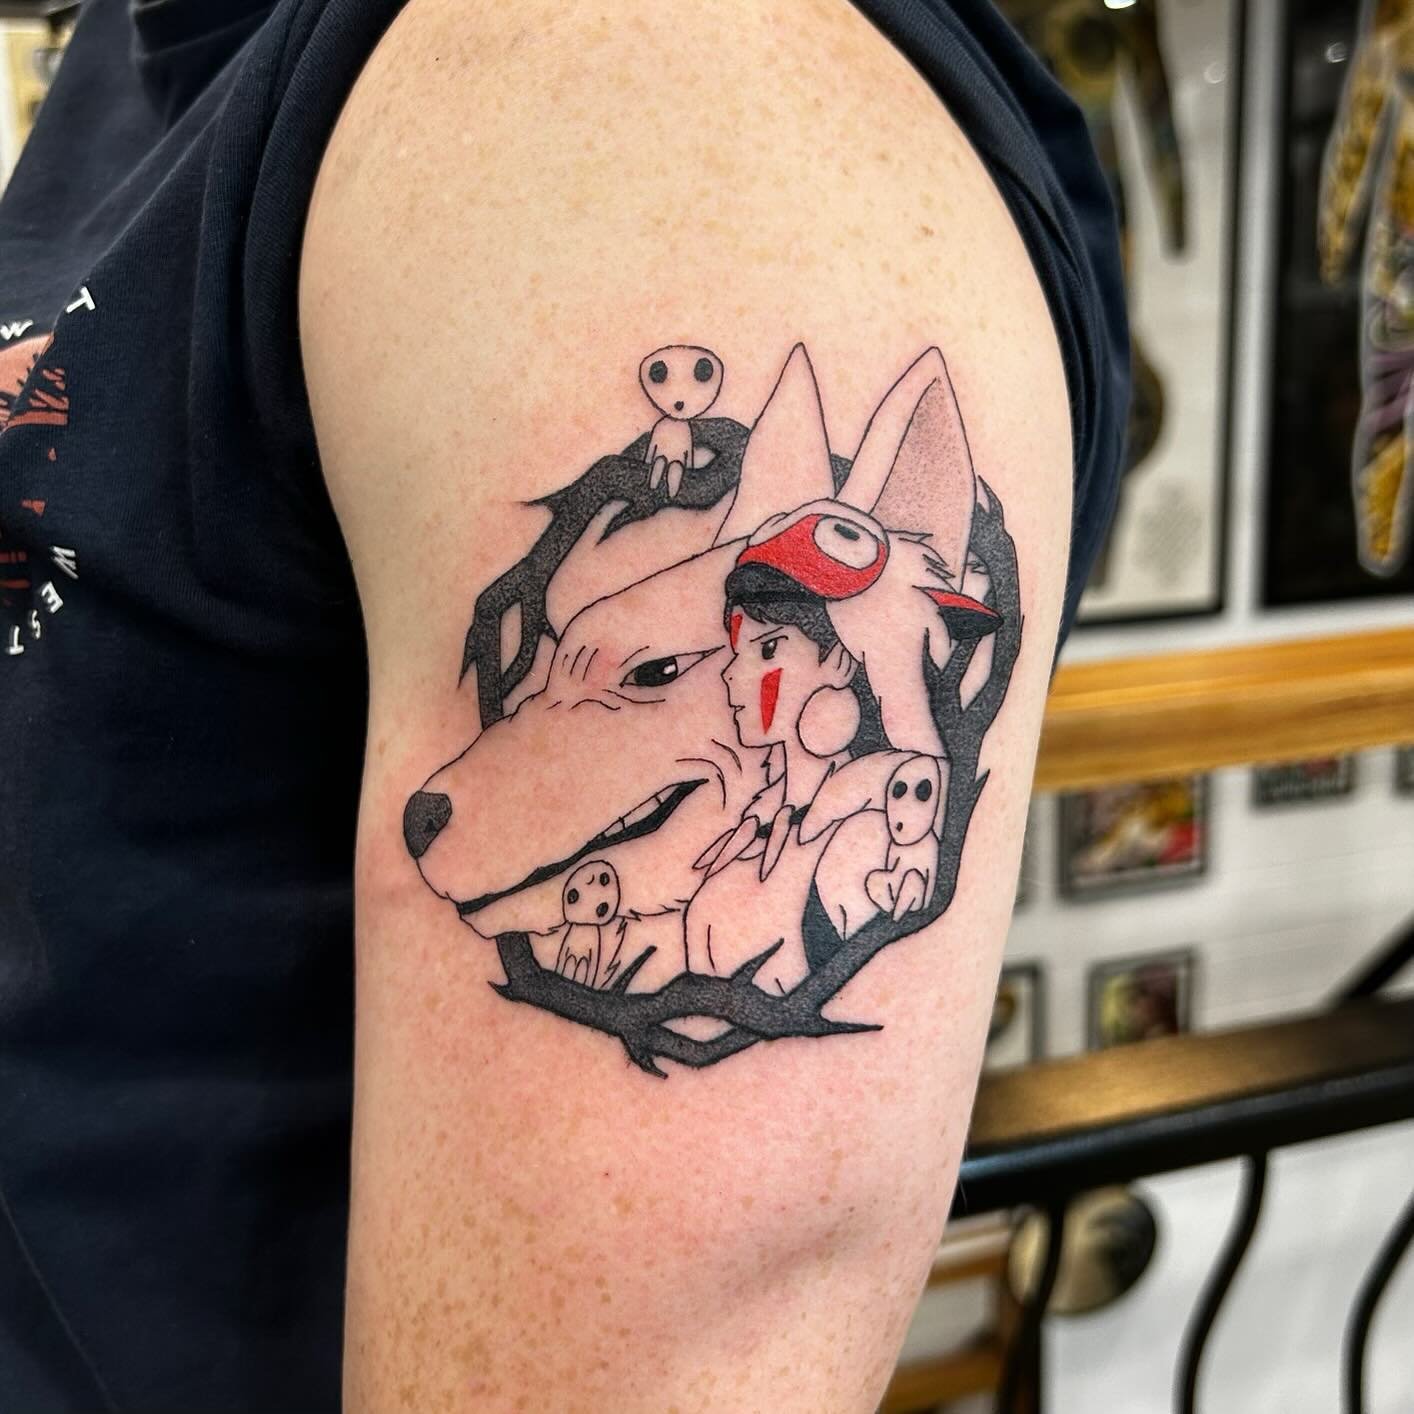 Princess Mononoke by Samantha! @samanthagenevera 
Check out Sam&rsquo;s page for her deals of flash this month and get in before all spots are gone! 
&bull;
&bull;
&bull;
&bull;
&bull;
#new #fyp #tradtattoo #goldcoast #goldcoasttattoo #visitgoldcoast